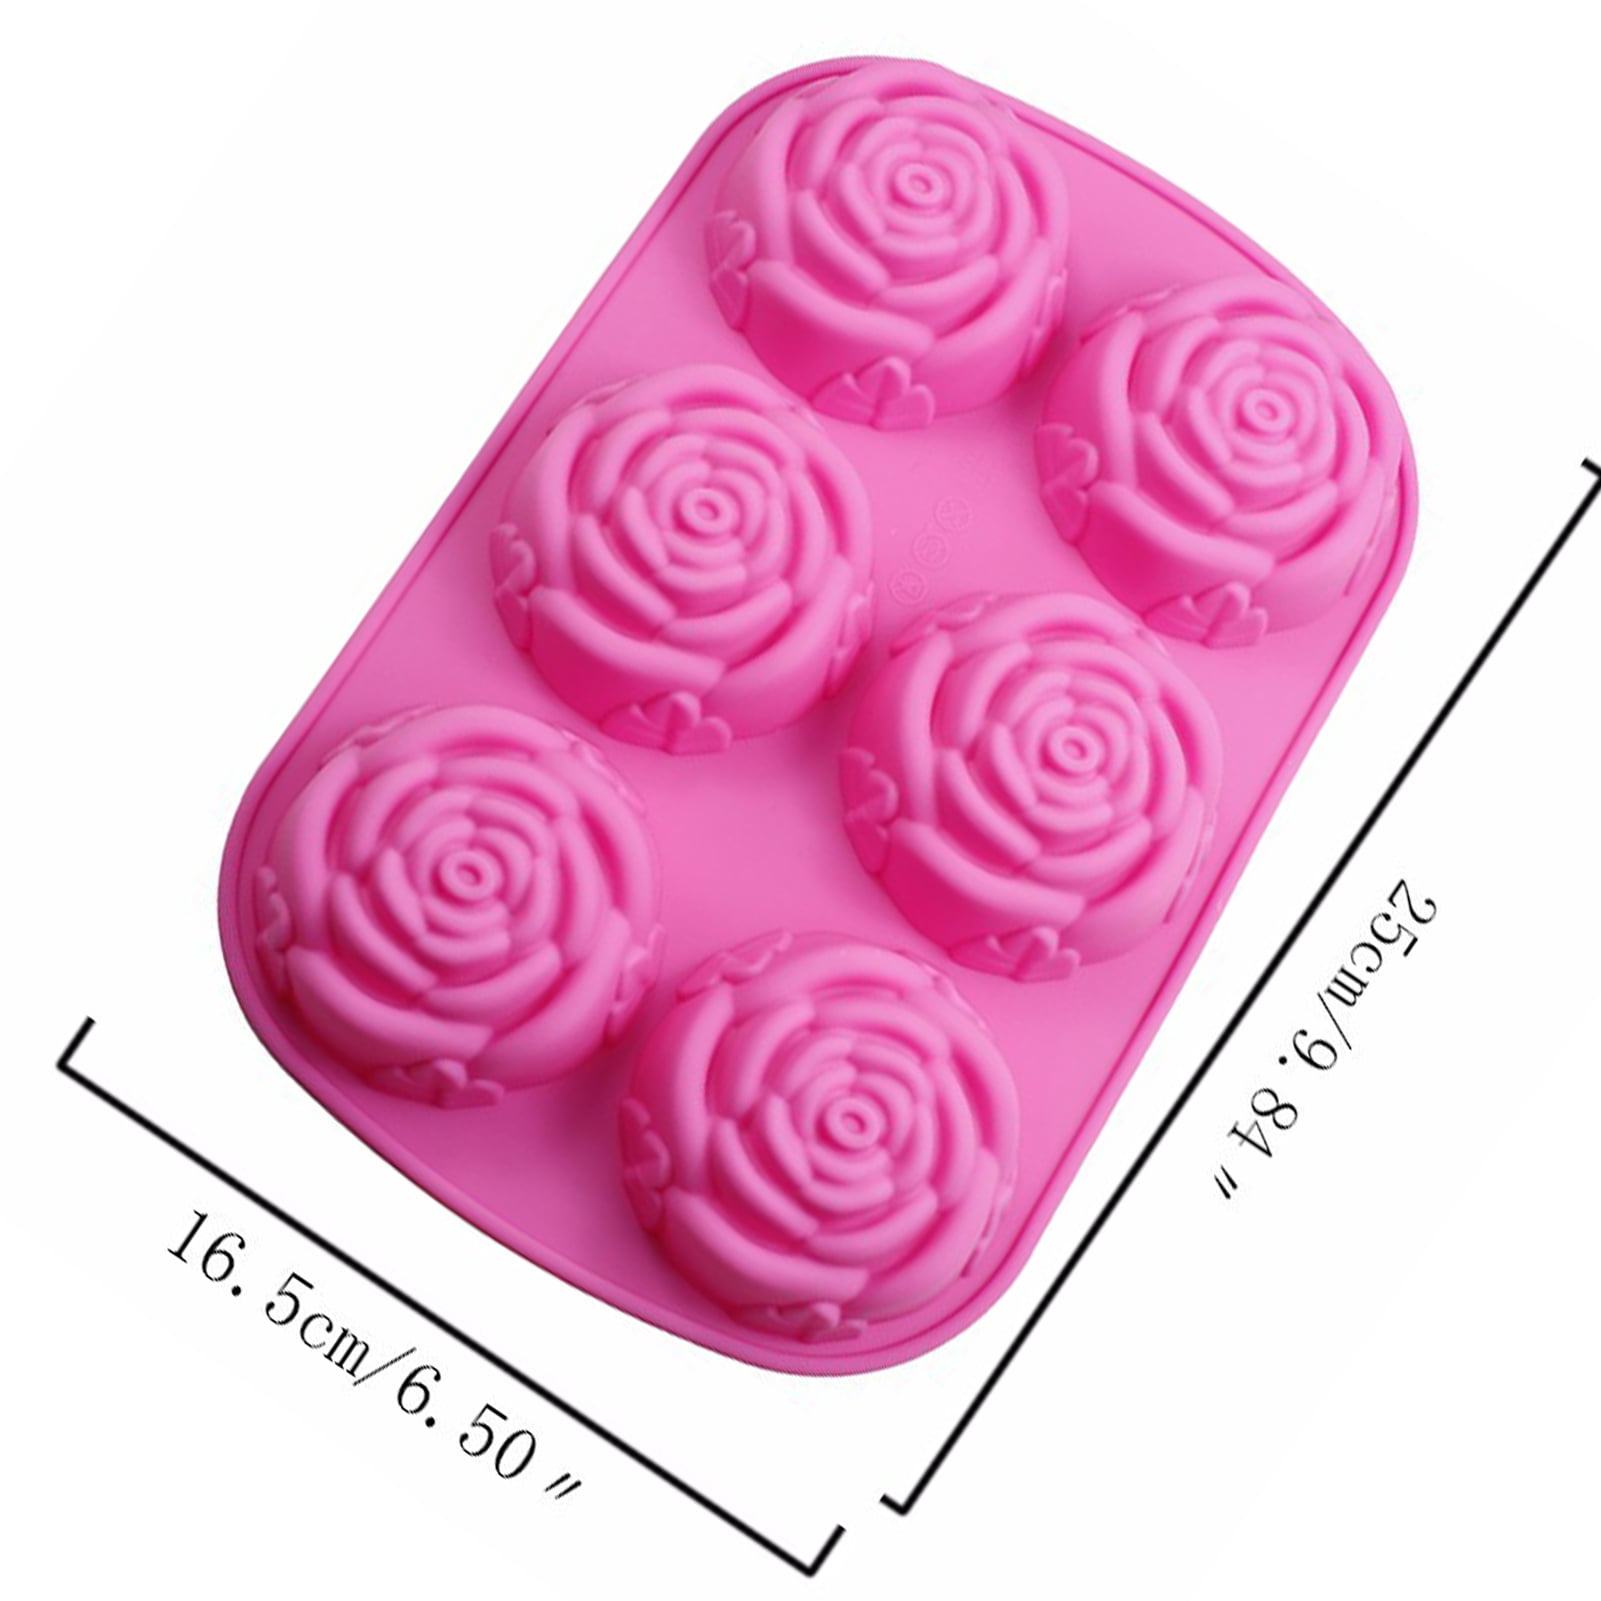 Yesbay 6-Cavity Crayon Mold Flexible Food-grade Pencil Fondant Stencil for Baking, Adult Unisex, Size: One size, Pink